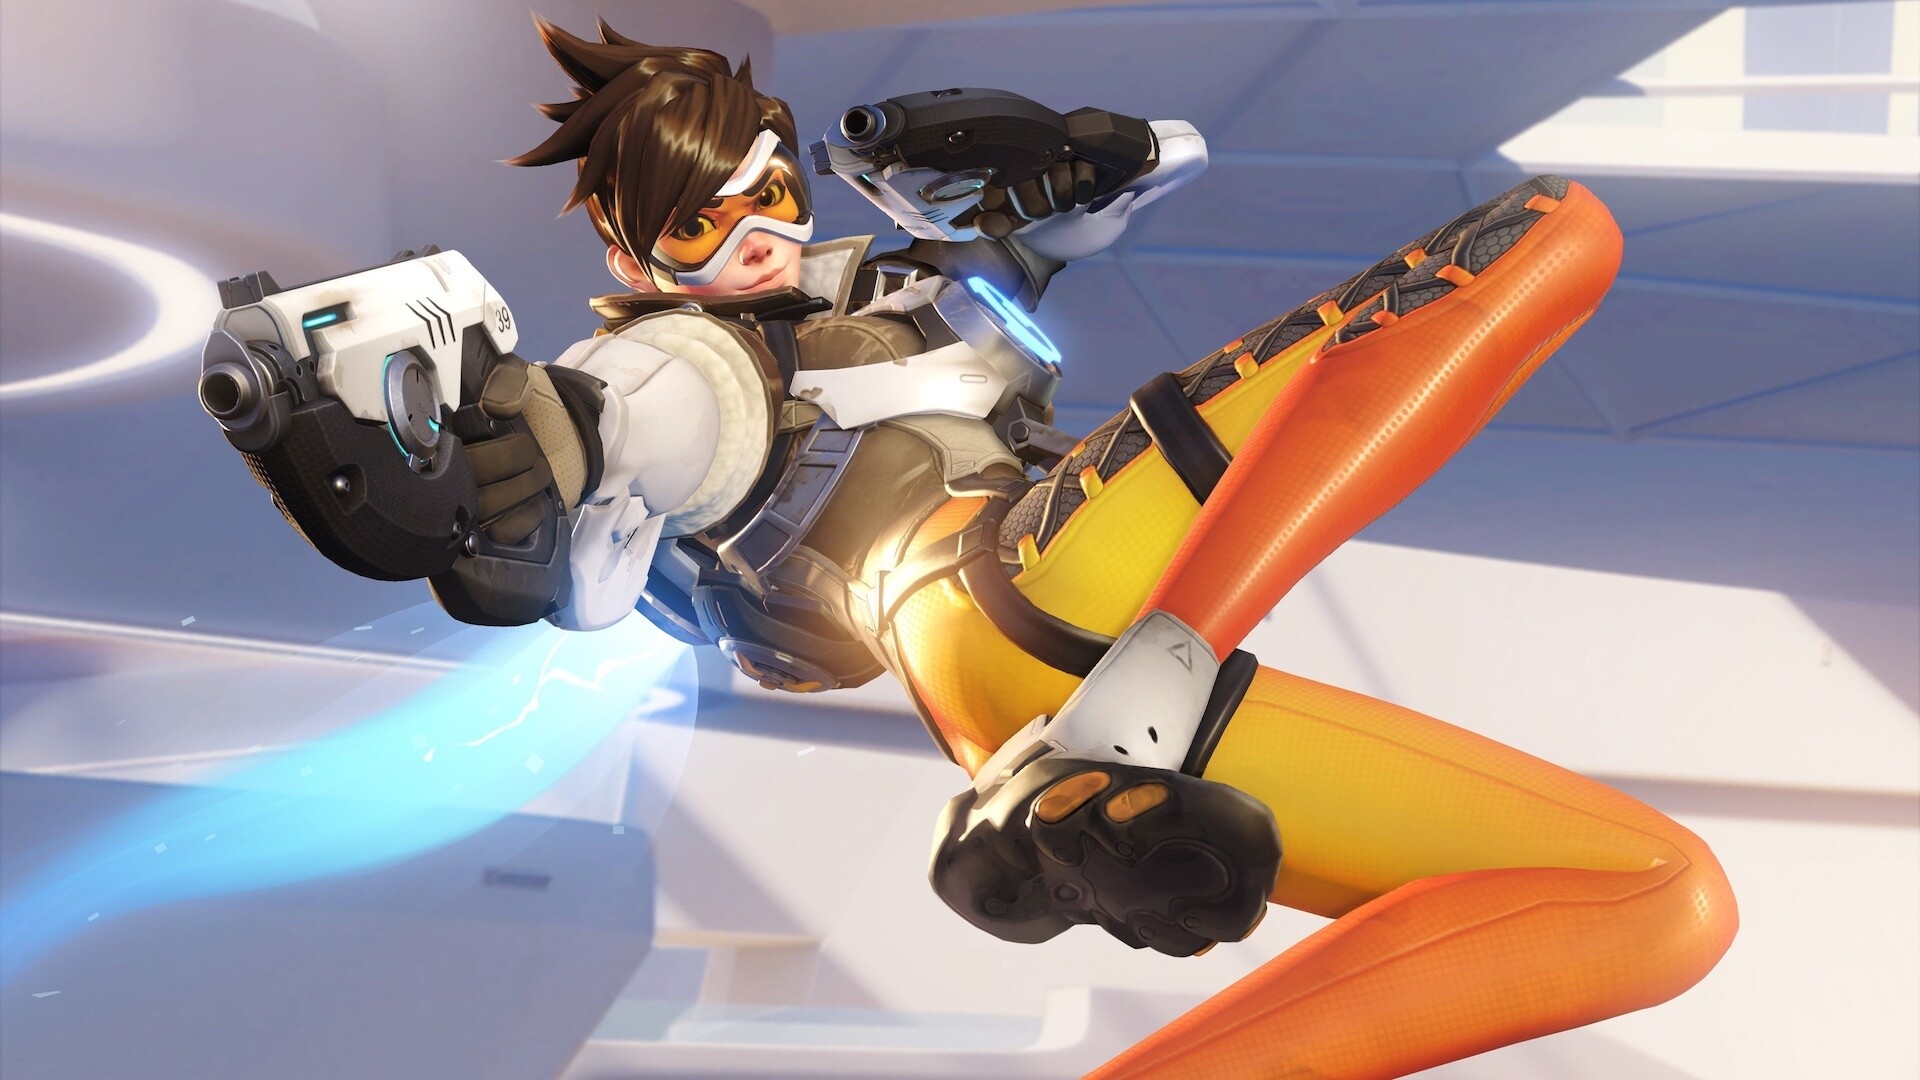 Overwatch: Tracer, A British pilot and adventurer. 1920x1080 Full HD Background.